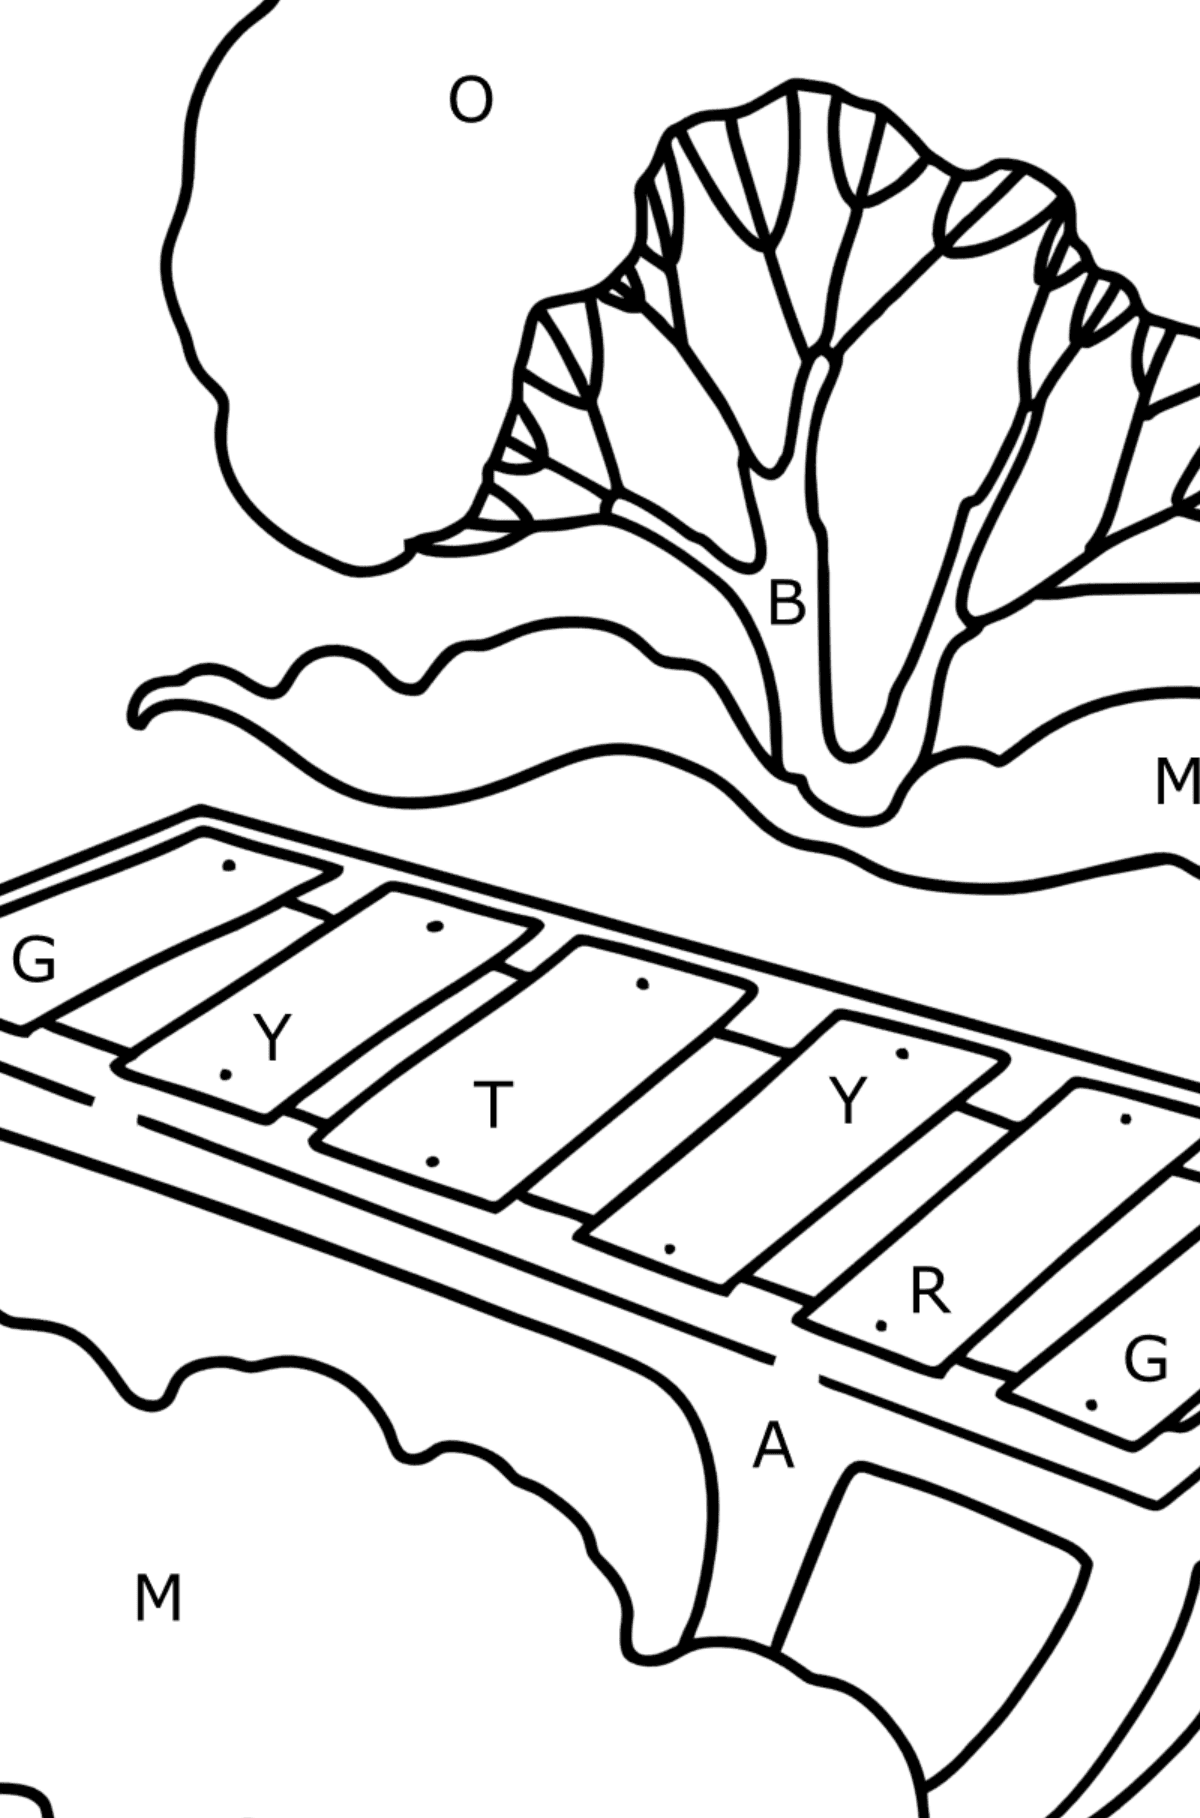 Coloring page - Sled for Kids - Coloring by Letters for Kids